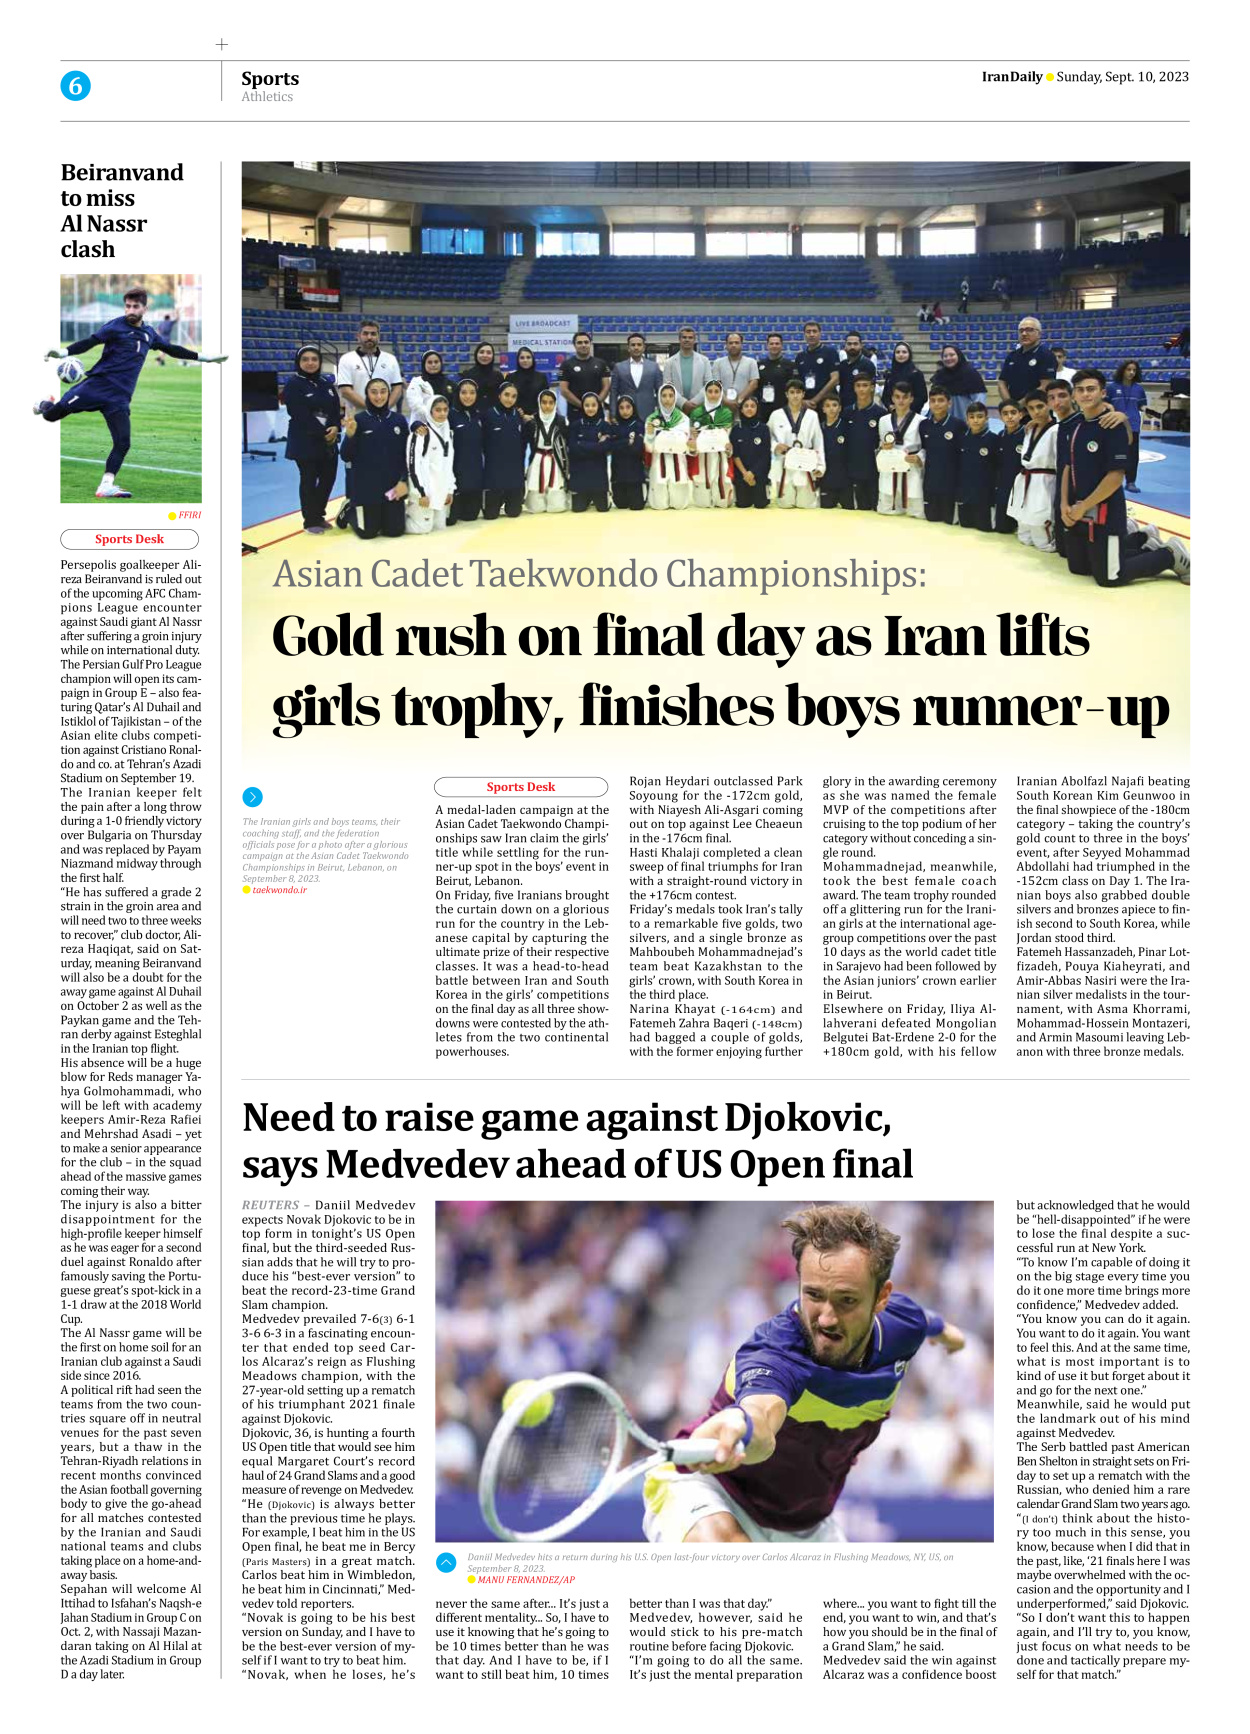 Iran Daily - Number Seven Thousand Three Hundred and Eighty Three - 10 September 2023 - Page 6